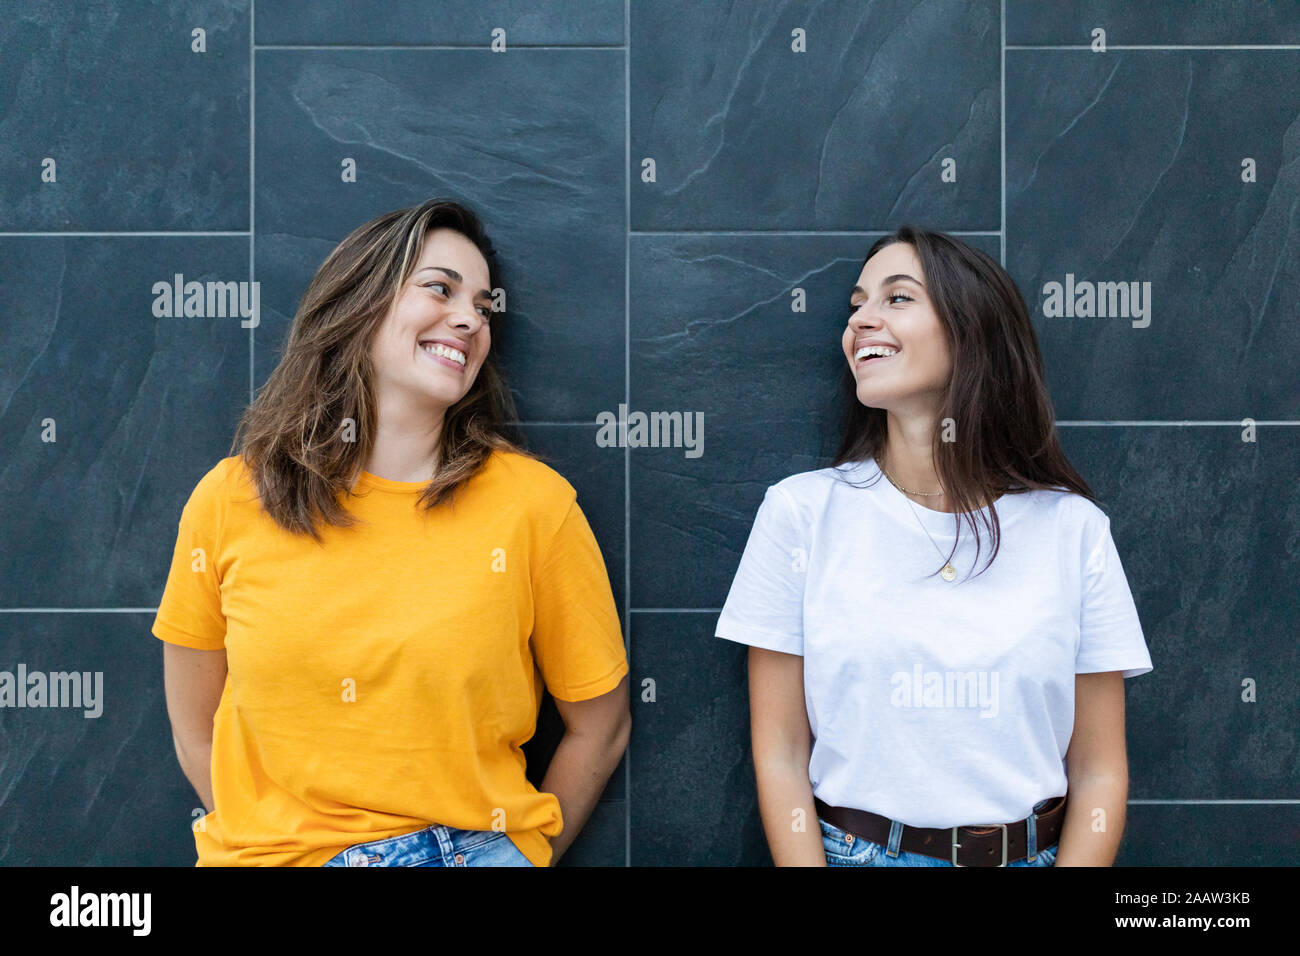 Two friends leaning on a gray wall and laughing Stock Photo